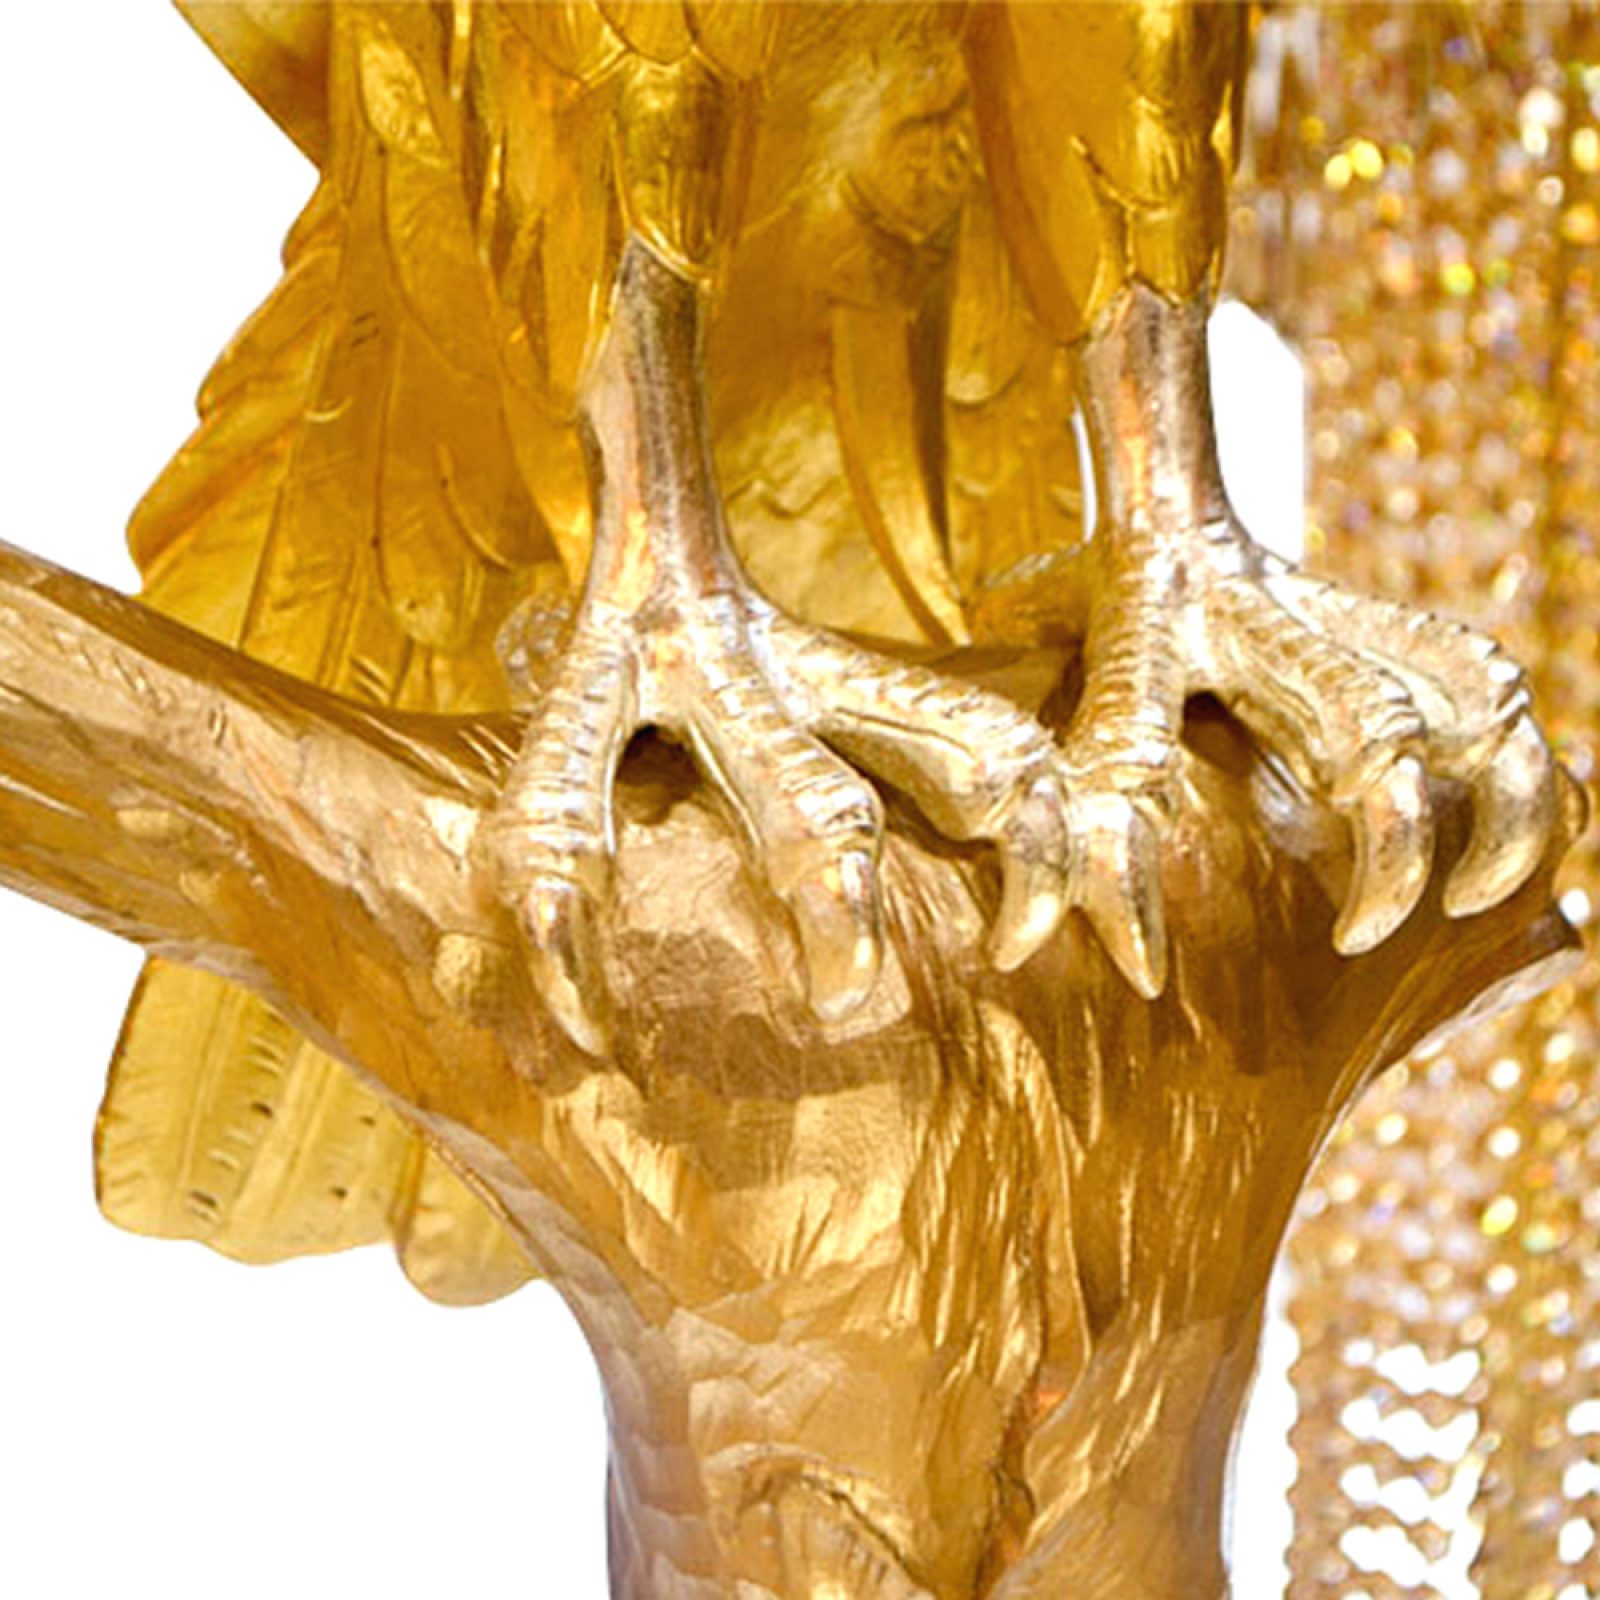 Kaddour - the sculpture by hand with various shades of 24-karat gold leafs | Natalis Luxus